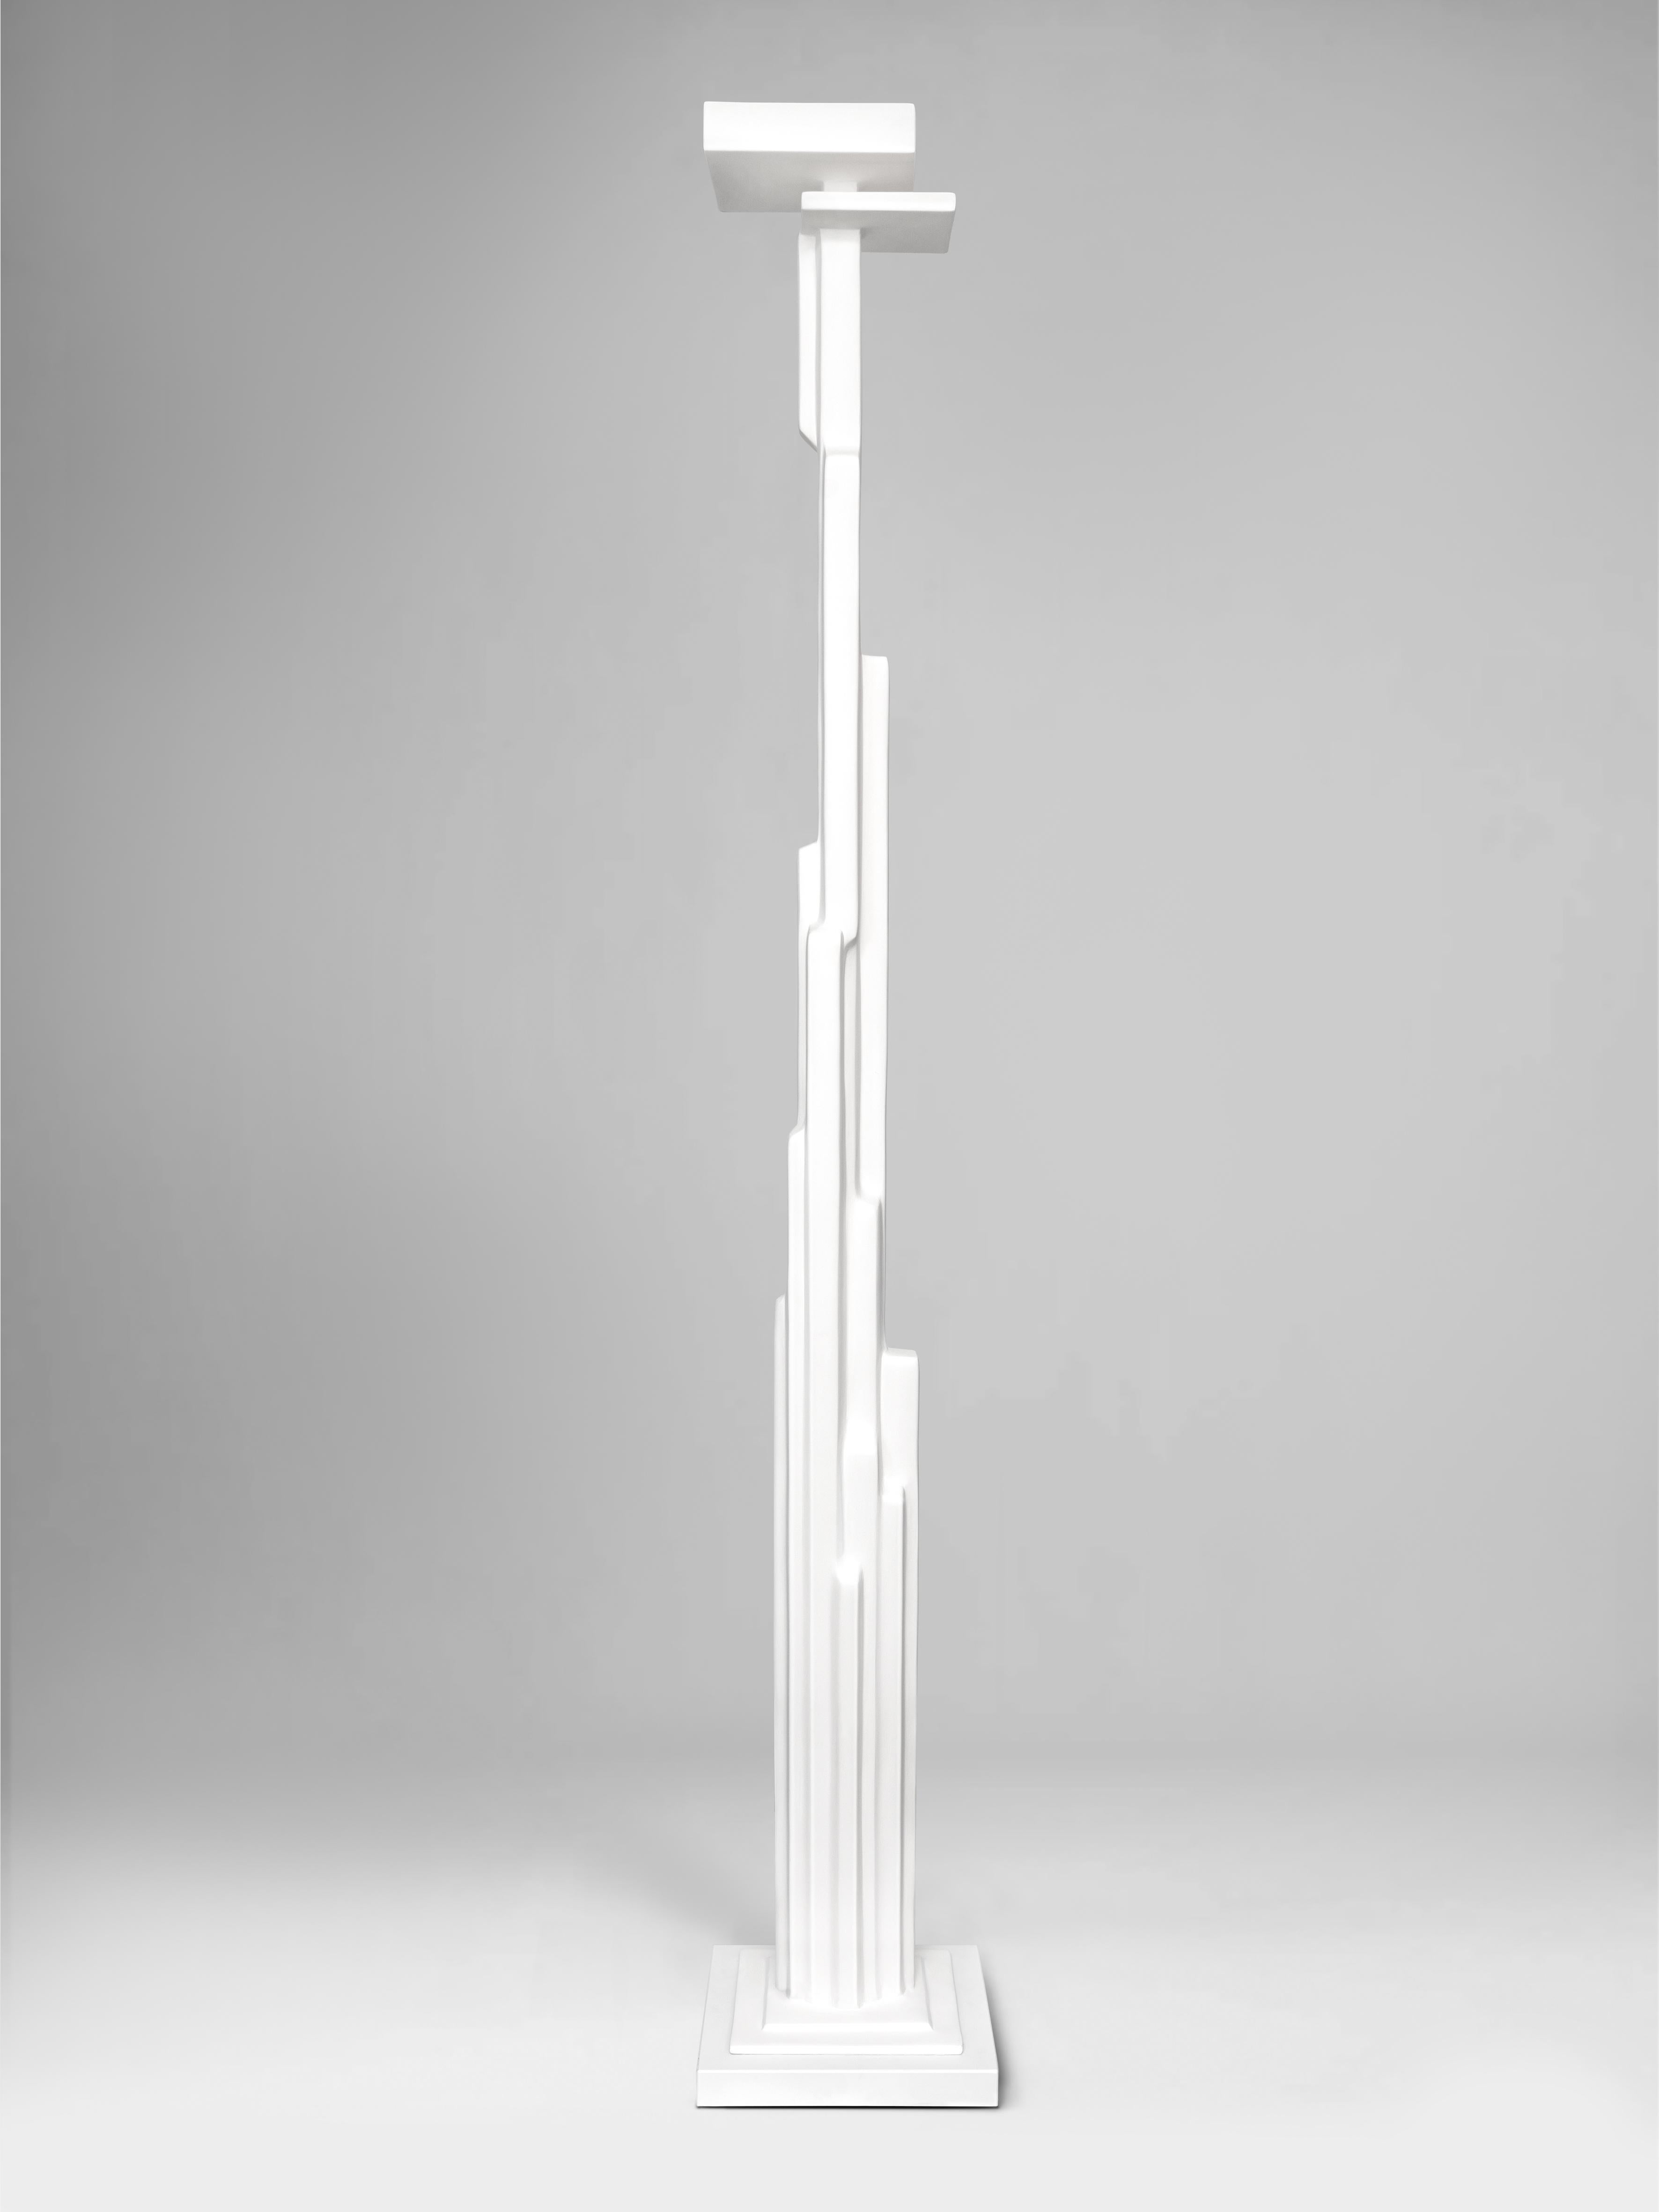 Assembled with various lengths of cut and joined steel bar on a White Quarzstone base, the Manhattan Floor Lamp resembles visual verticality of New York’s buildings. Hand sculpted and unique.  Uplighter with one bulb. In stock. Please, allow 2 weeks